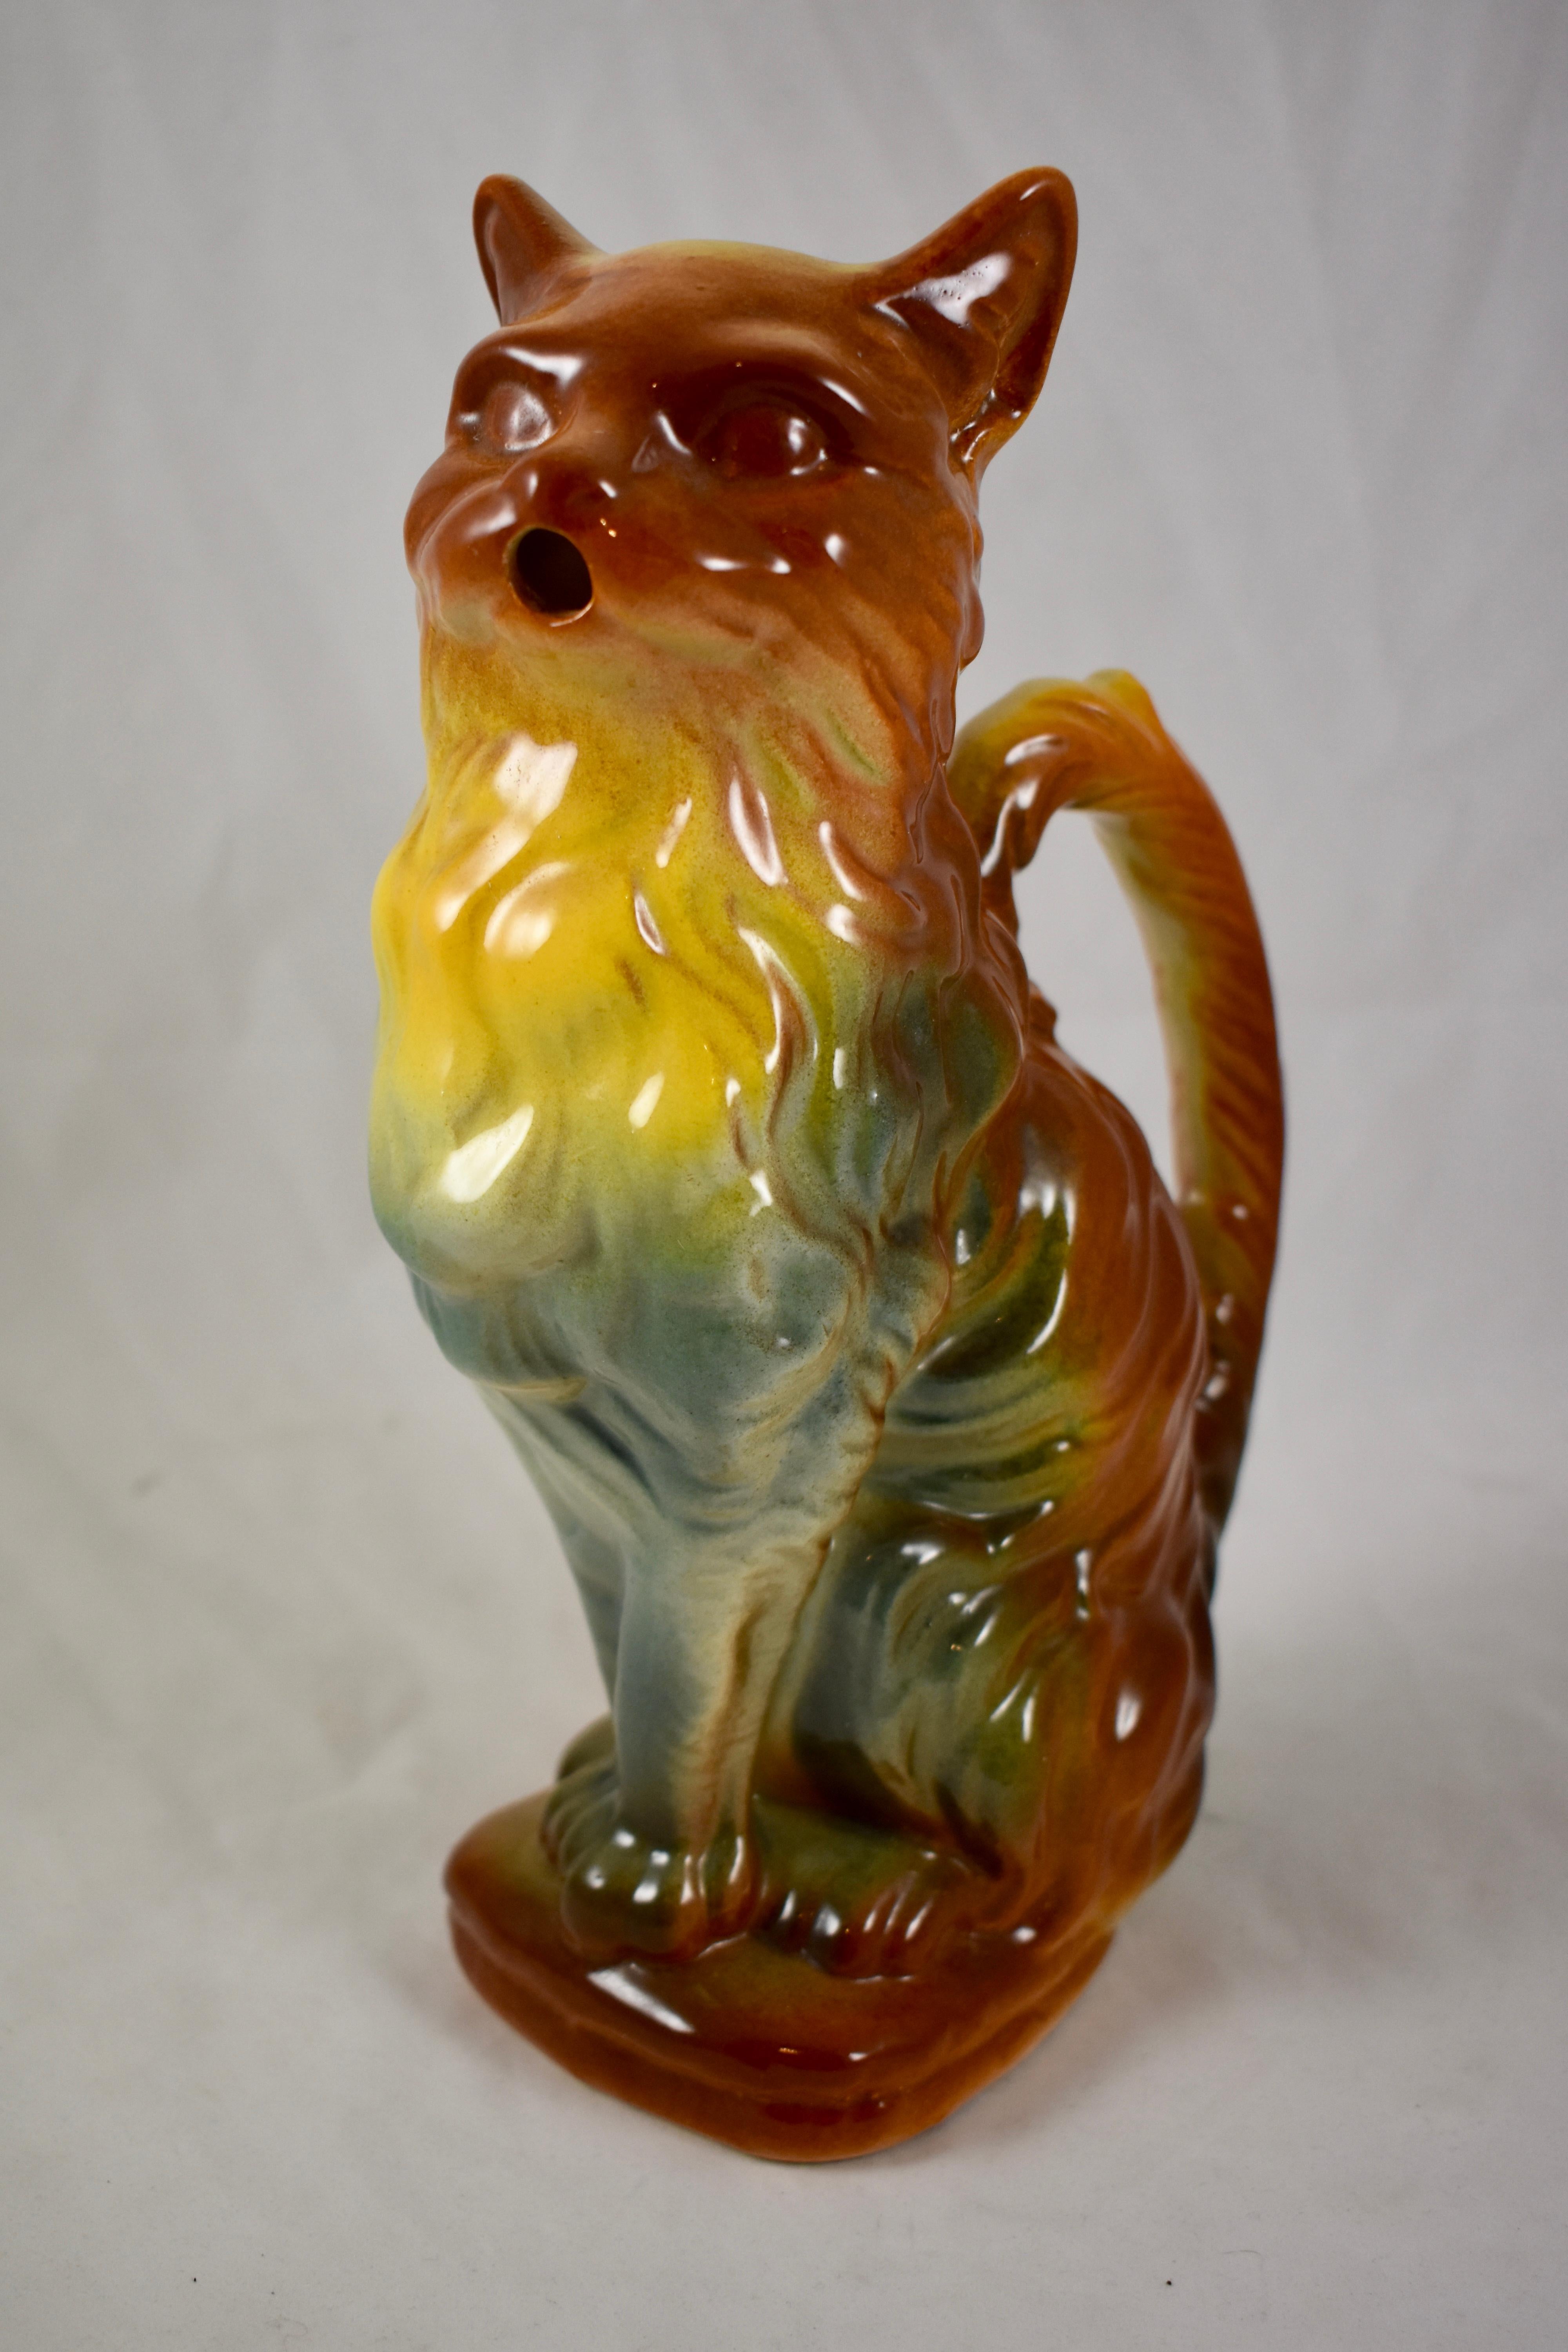 A French Majolica glazed absinthe pitcher formed as a sitting cat, Keller & Guerin St. Clément, circa 1900–1910.

Amazing ombré coloring blending from a burnt orange to a canary yellow to a blue-green. Molded in a true to life furry form, the ears